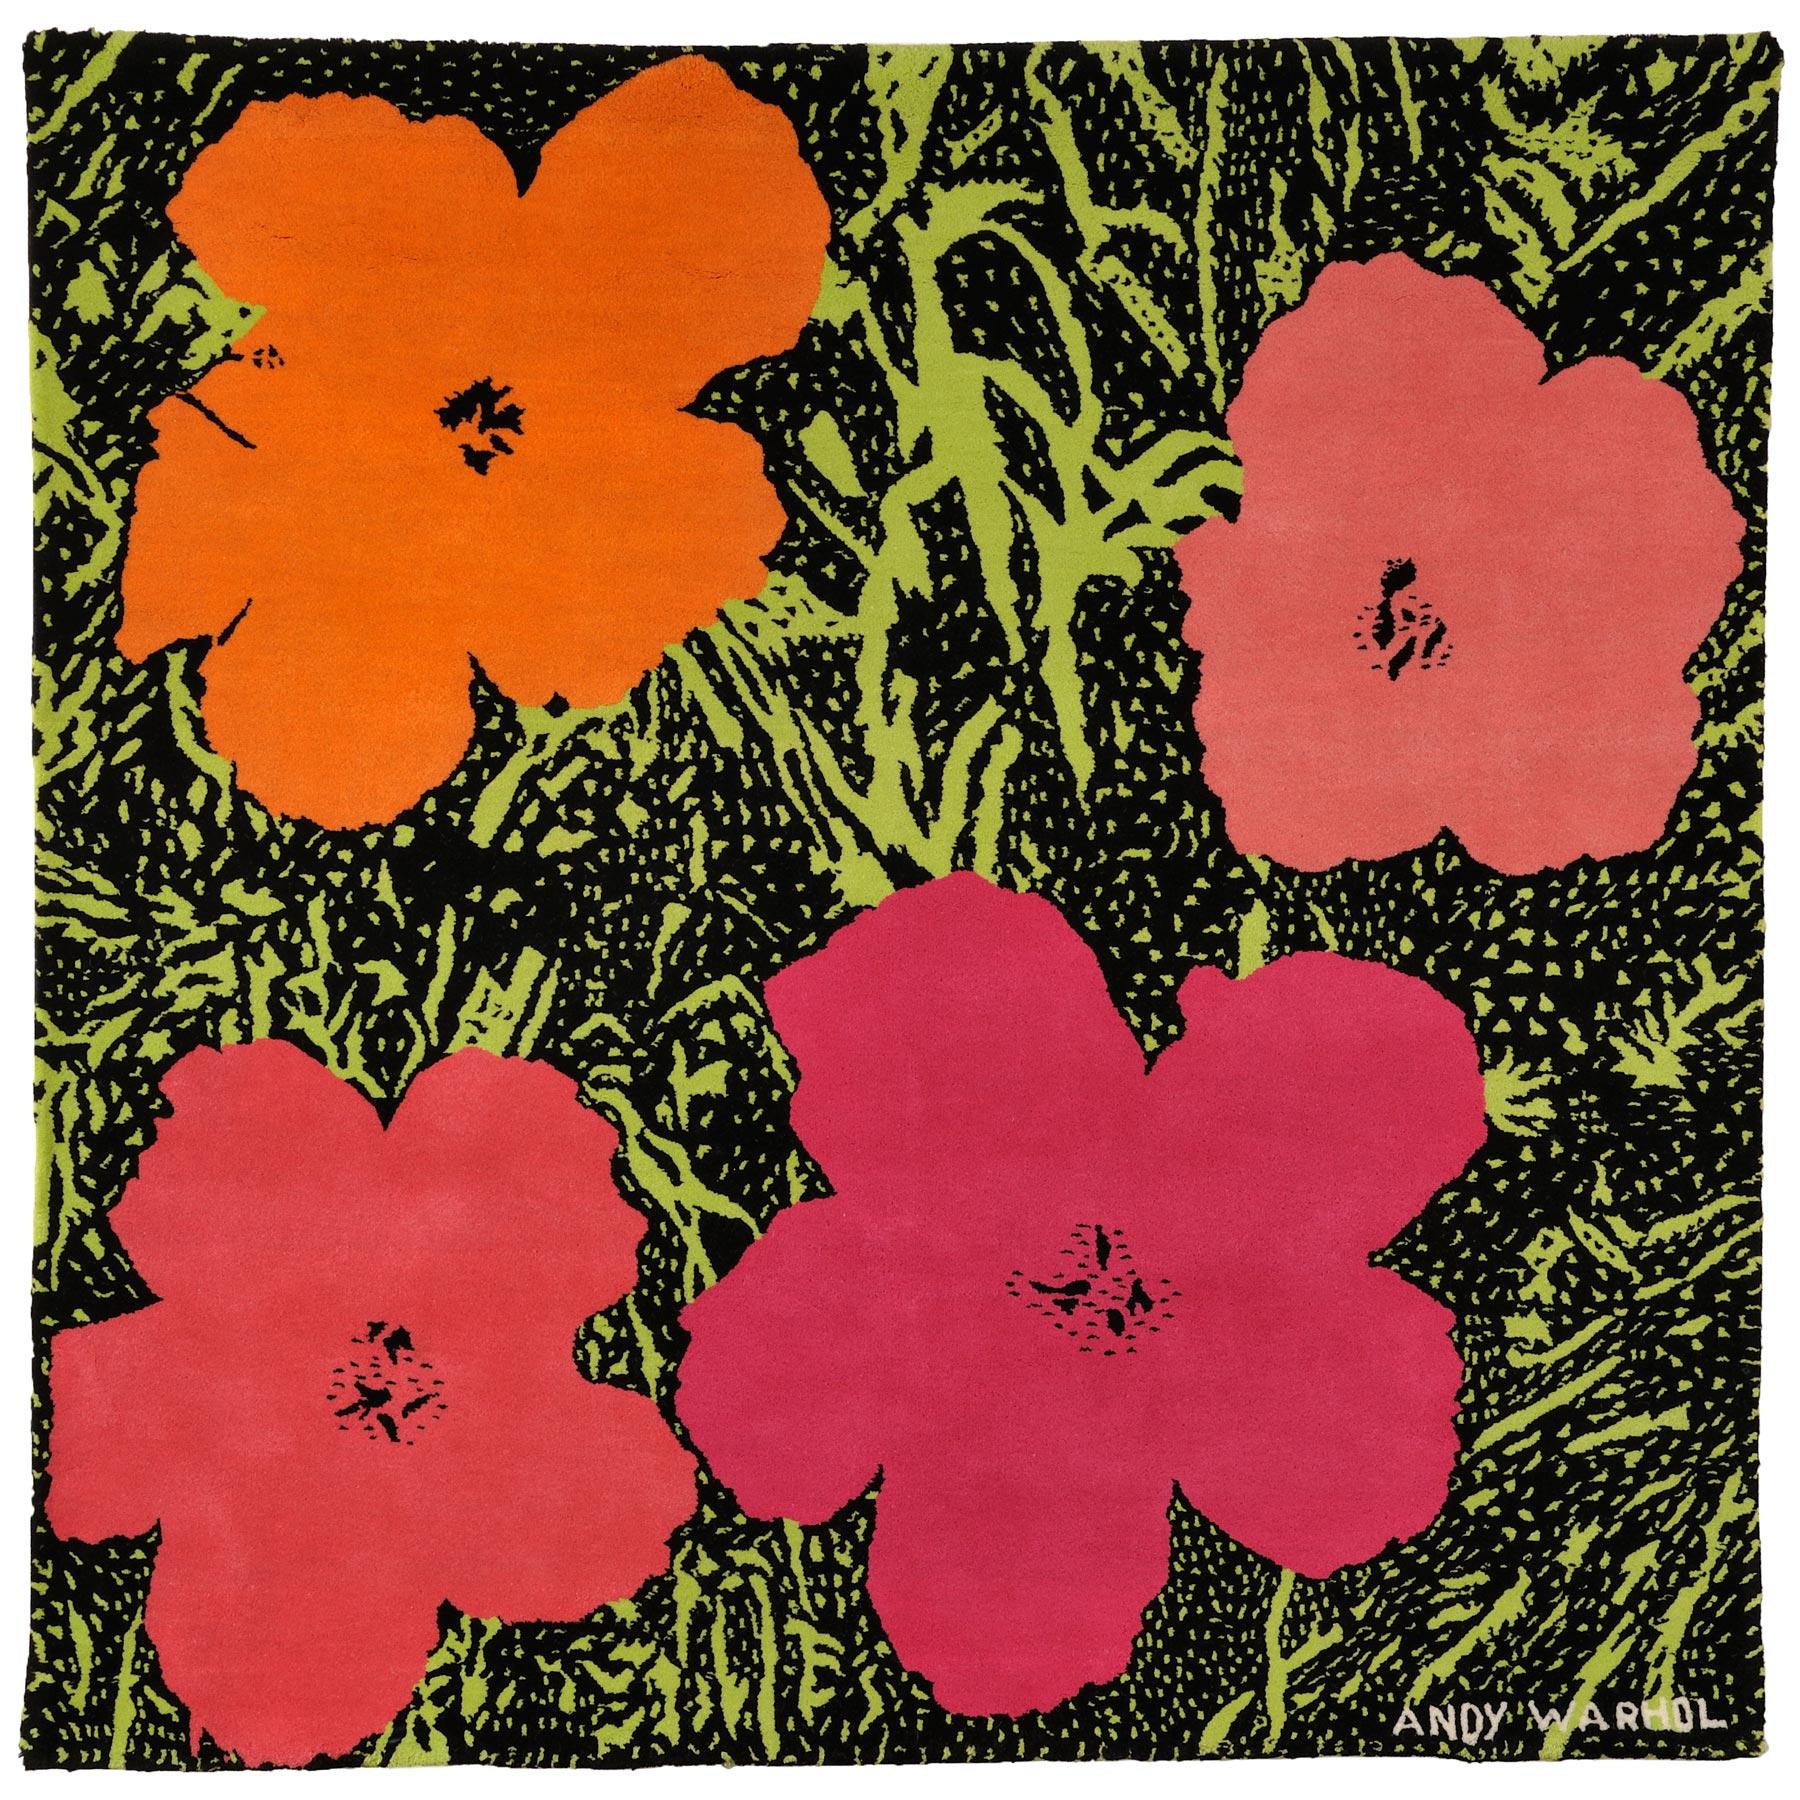 Flowers, After Andy Warhol-Pop Art, Tapestry, Edition, Contemporary, Design,Gift